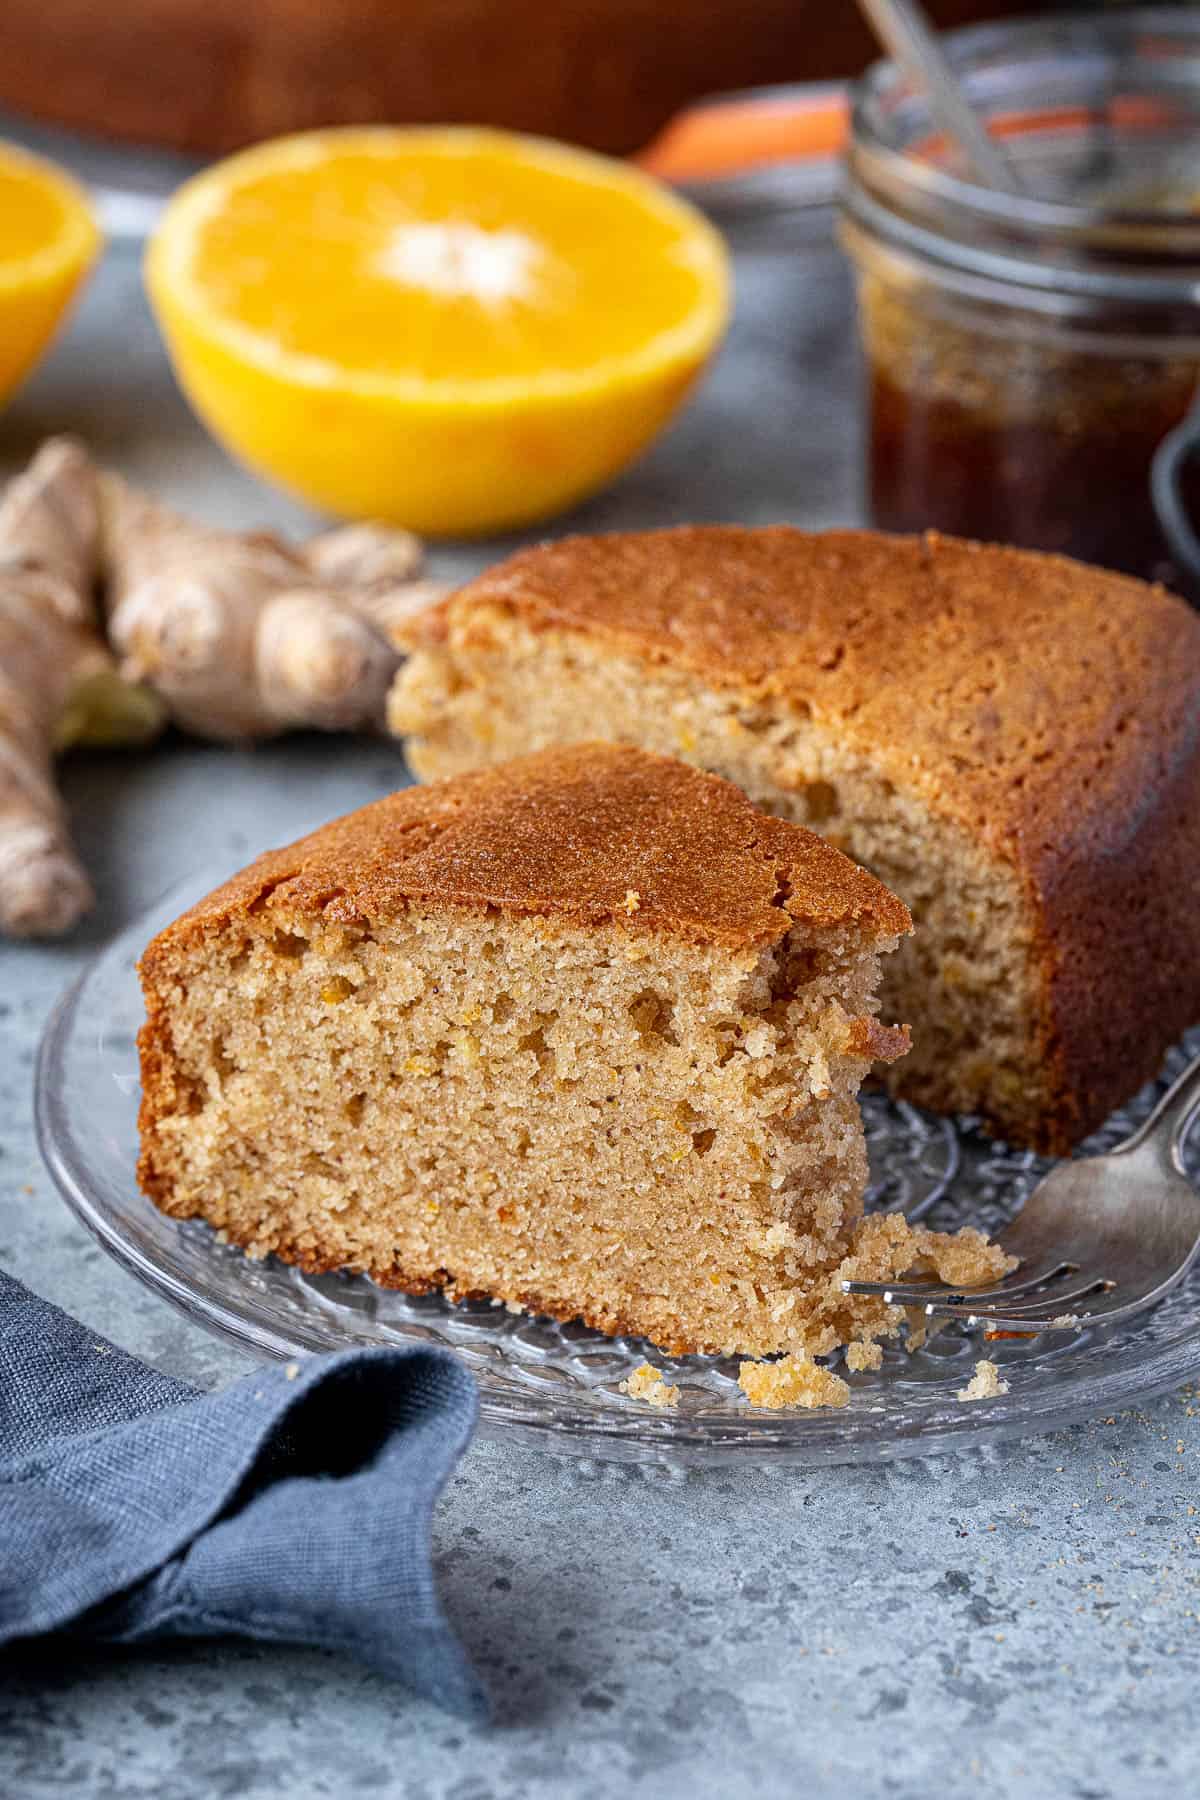 A slice of marmalade and ginger cake with a forkful removed.